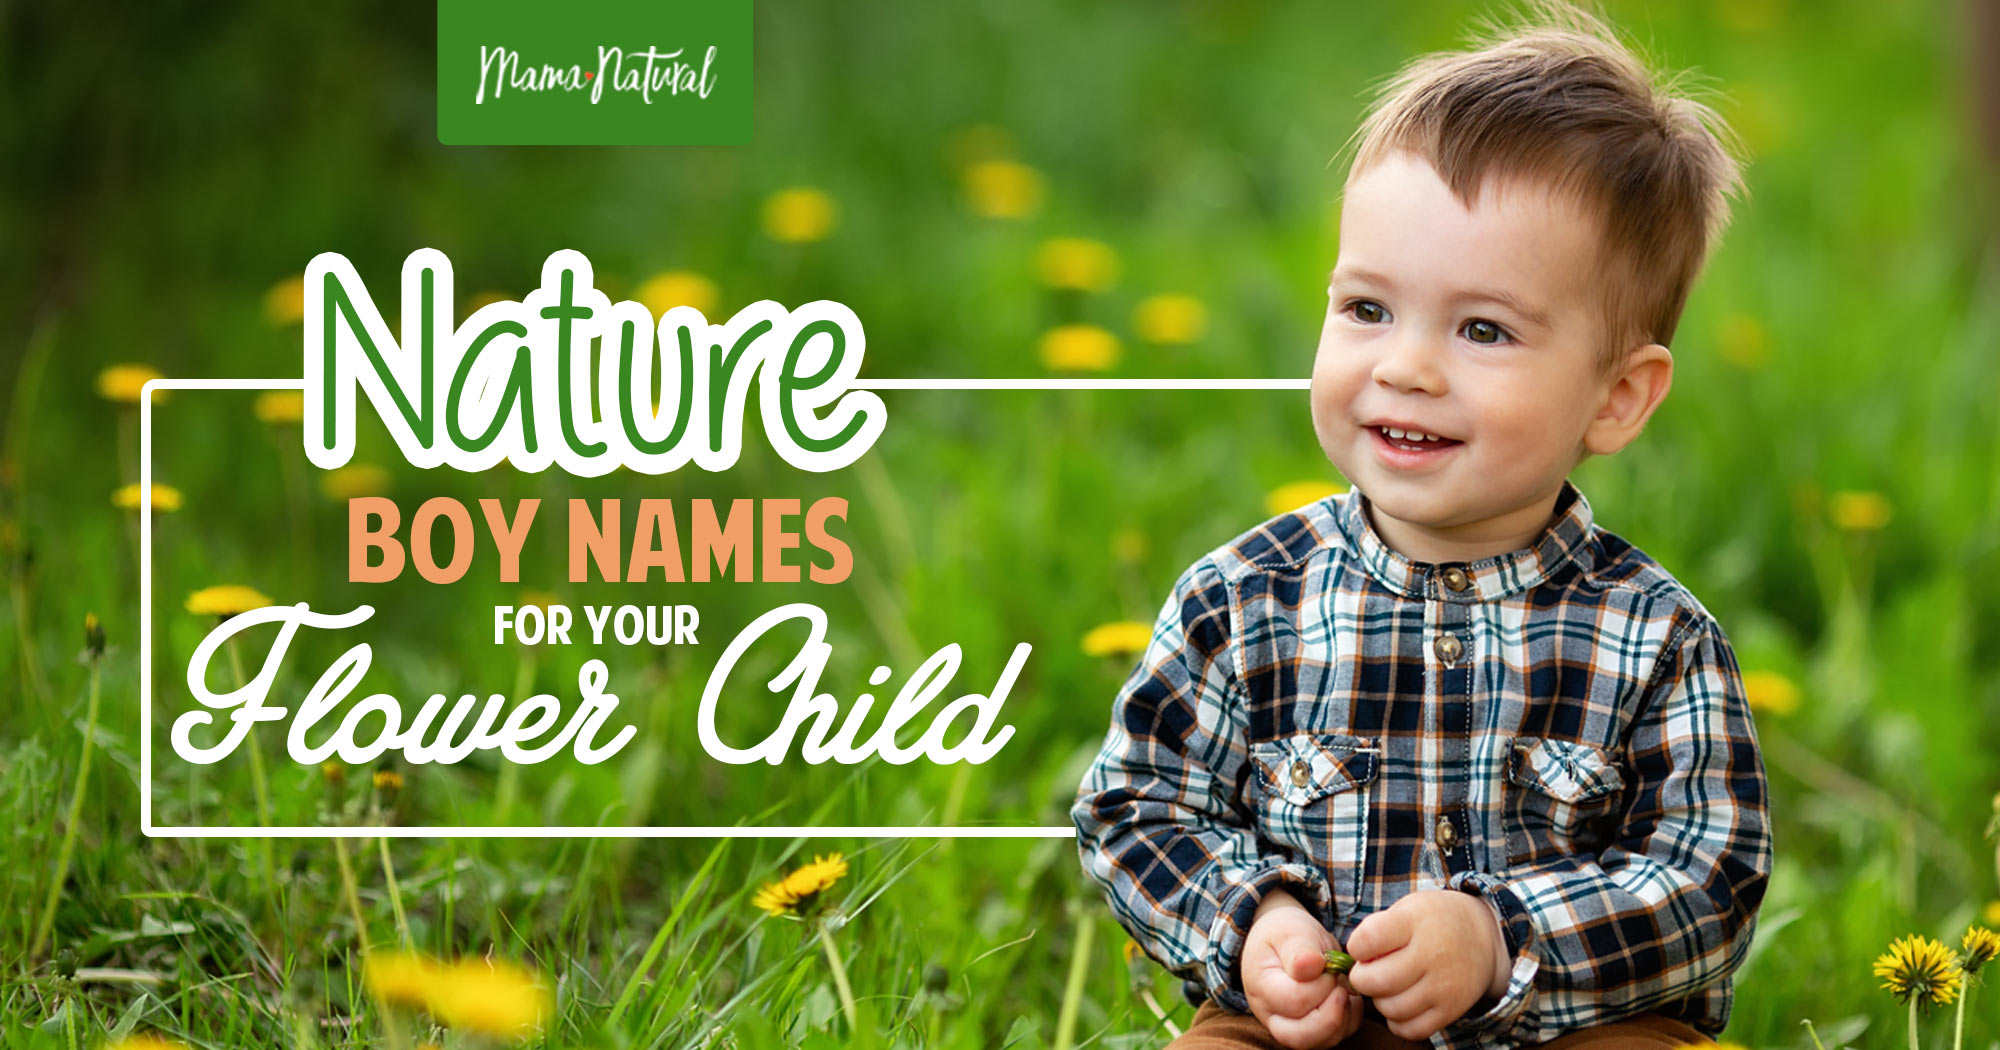 Boy Names For Your Flower Child - Mama Natural